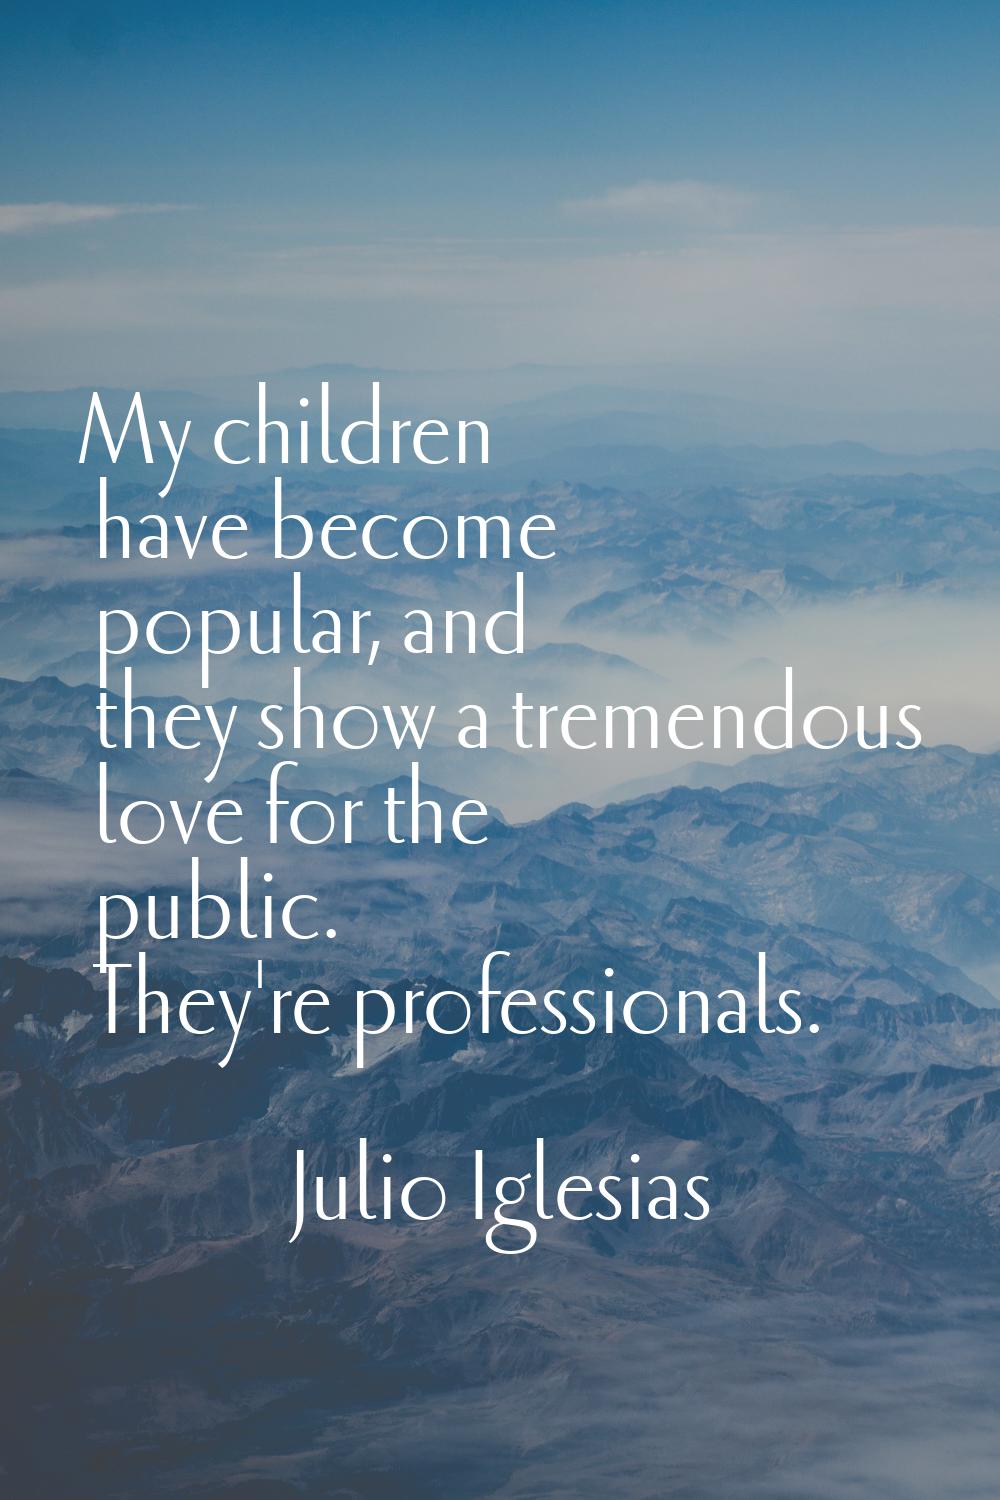 My children have become popular, and they show a tremendous love for the public. They're profession